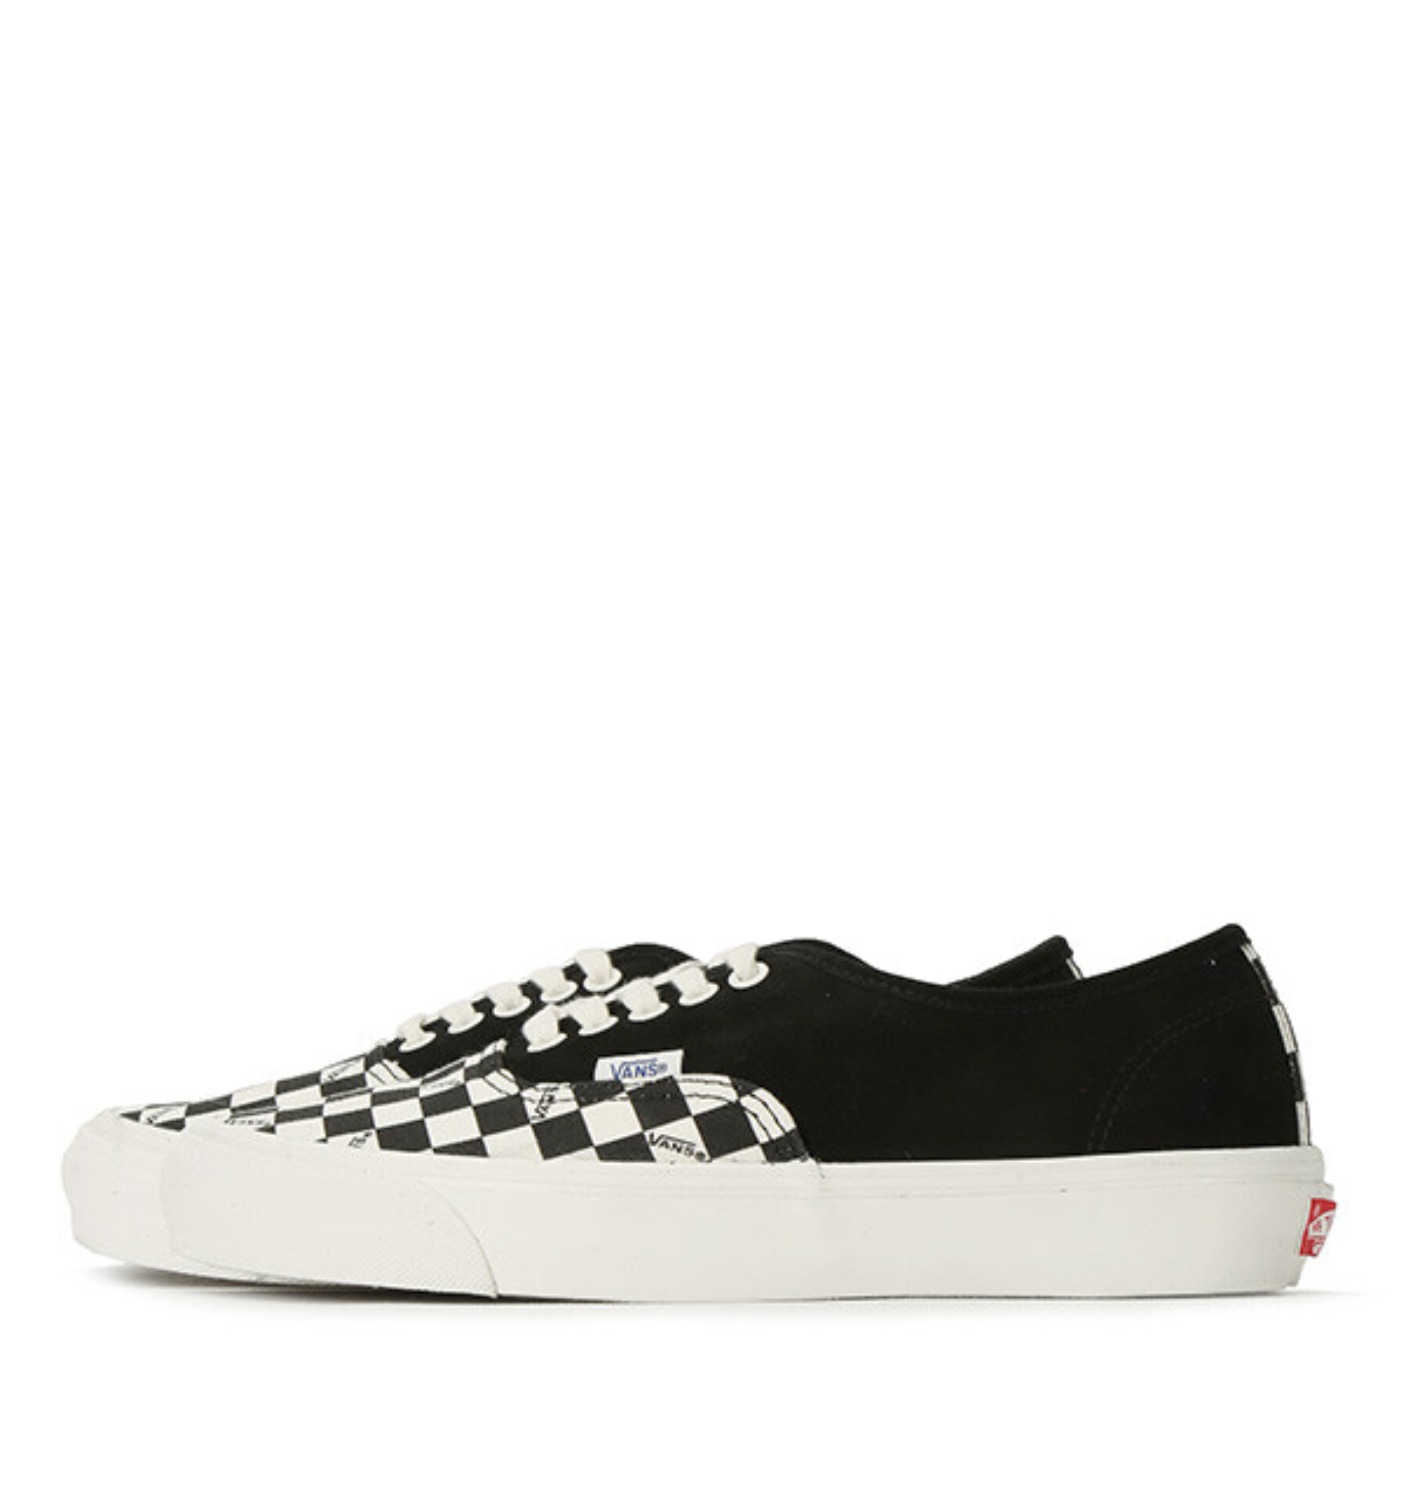 OG AUTHENTIC LX(SUEDE/CANVAS) BLACK/CHECKERBOARD